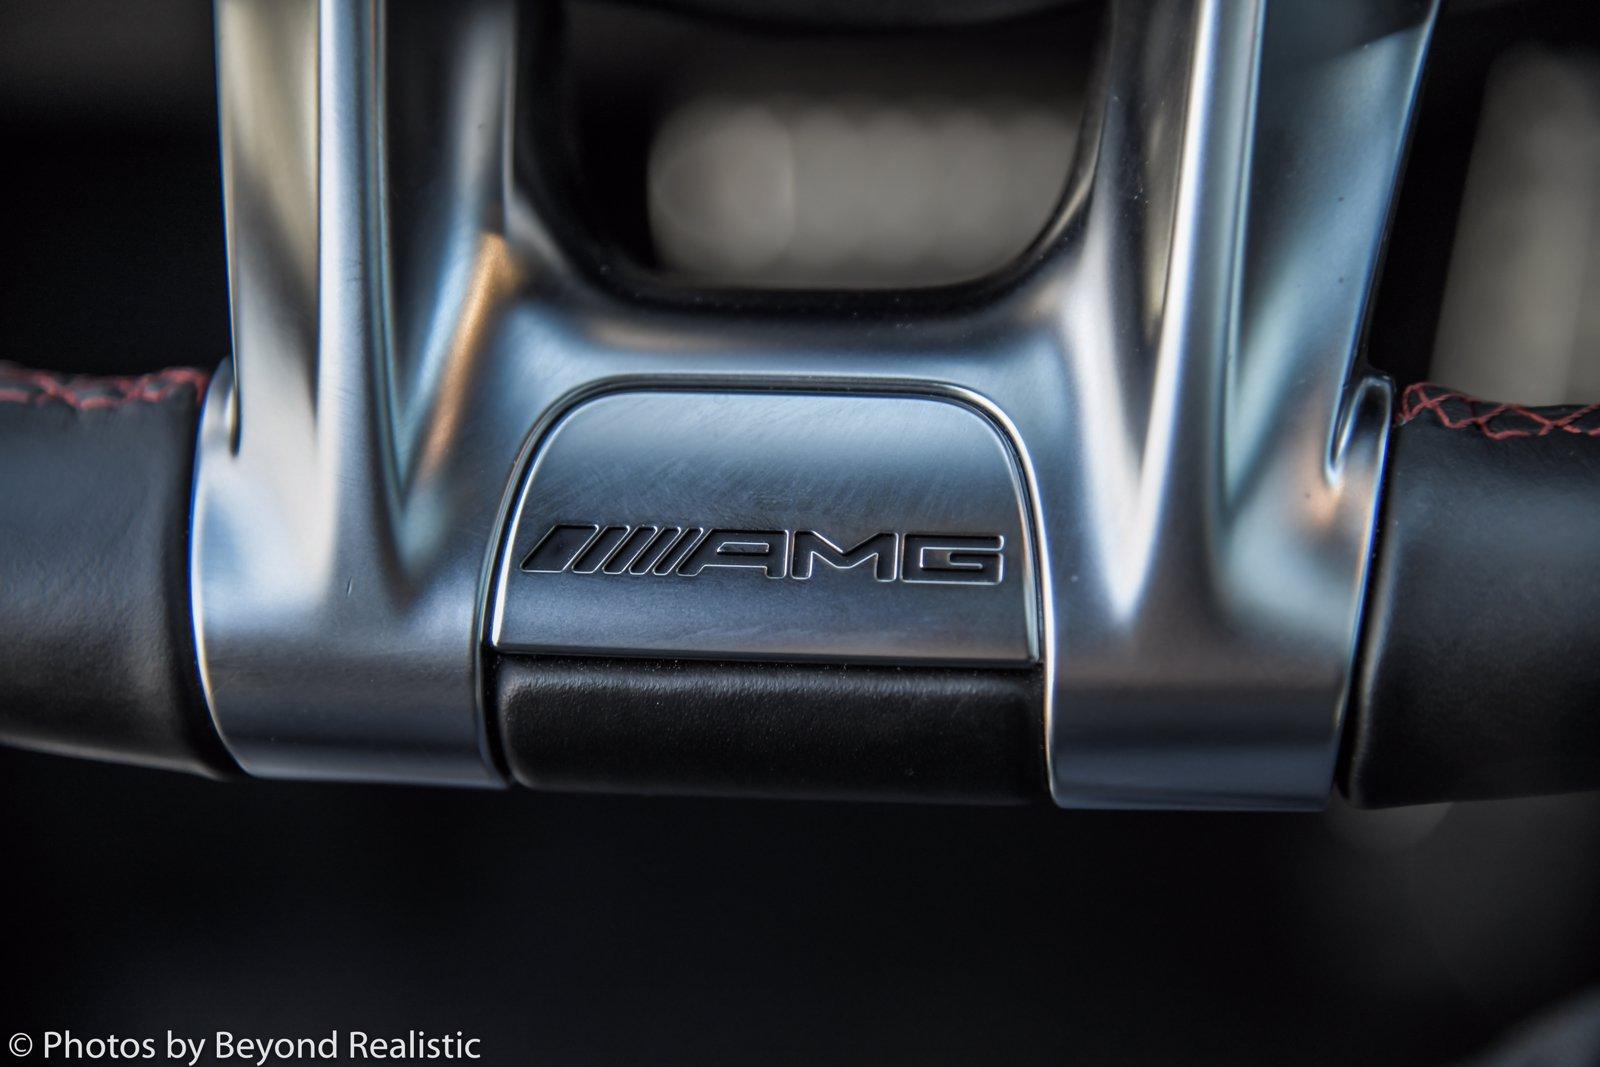 Used 2020 Mercedes-Benz AMG CLS 53, AMG Night Pkg, | Downers Grove, IL